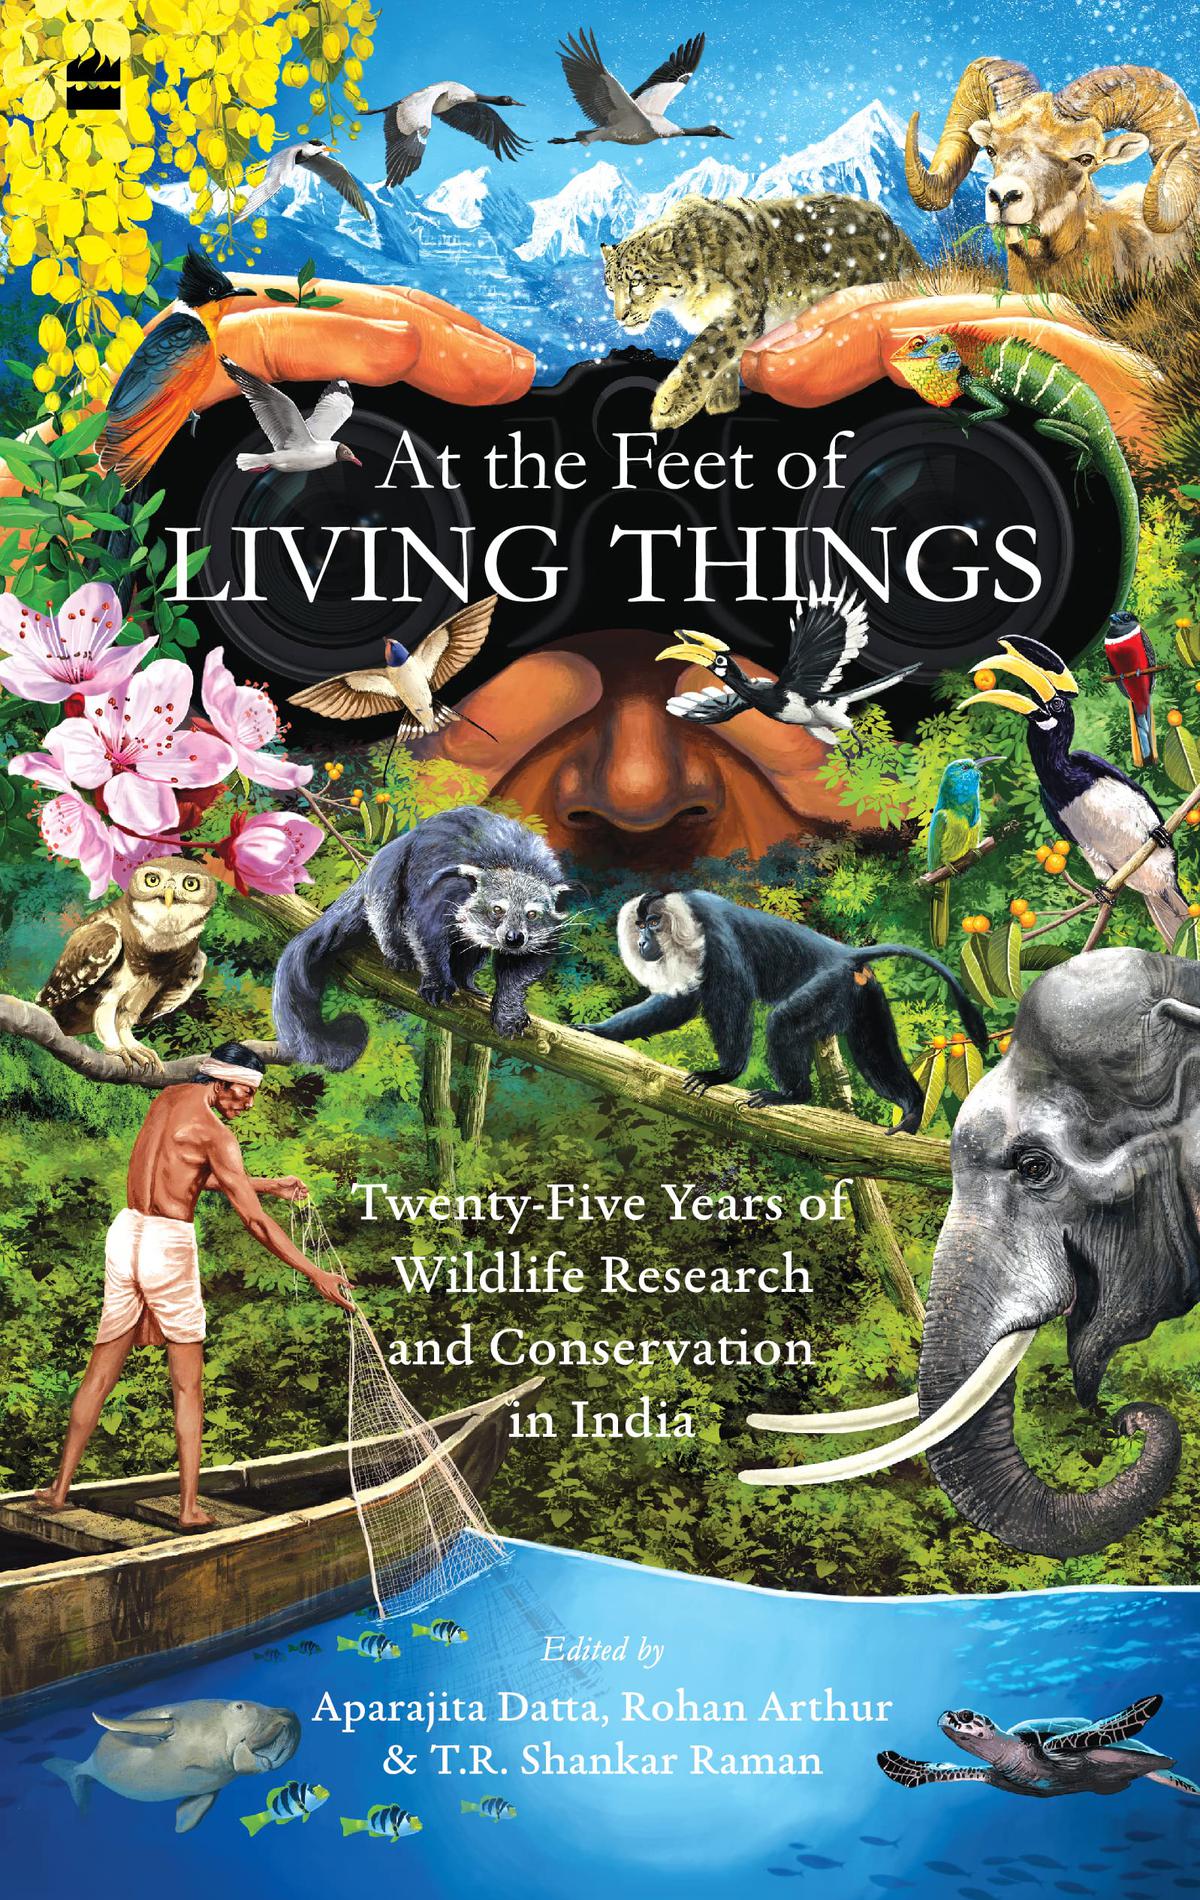 Review of At the Feet of Living Things — Twenty-Five Years of Wildlife Research and Conservation in India: Social change for nature